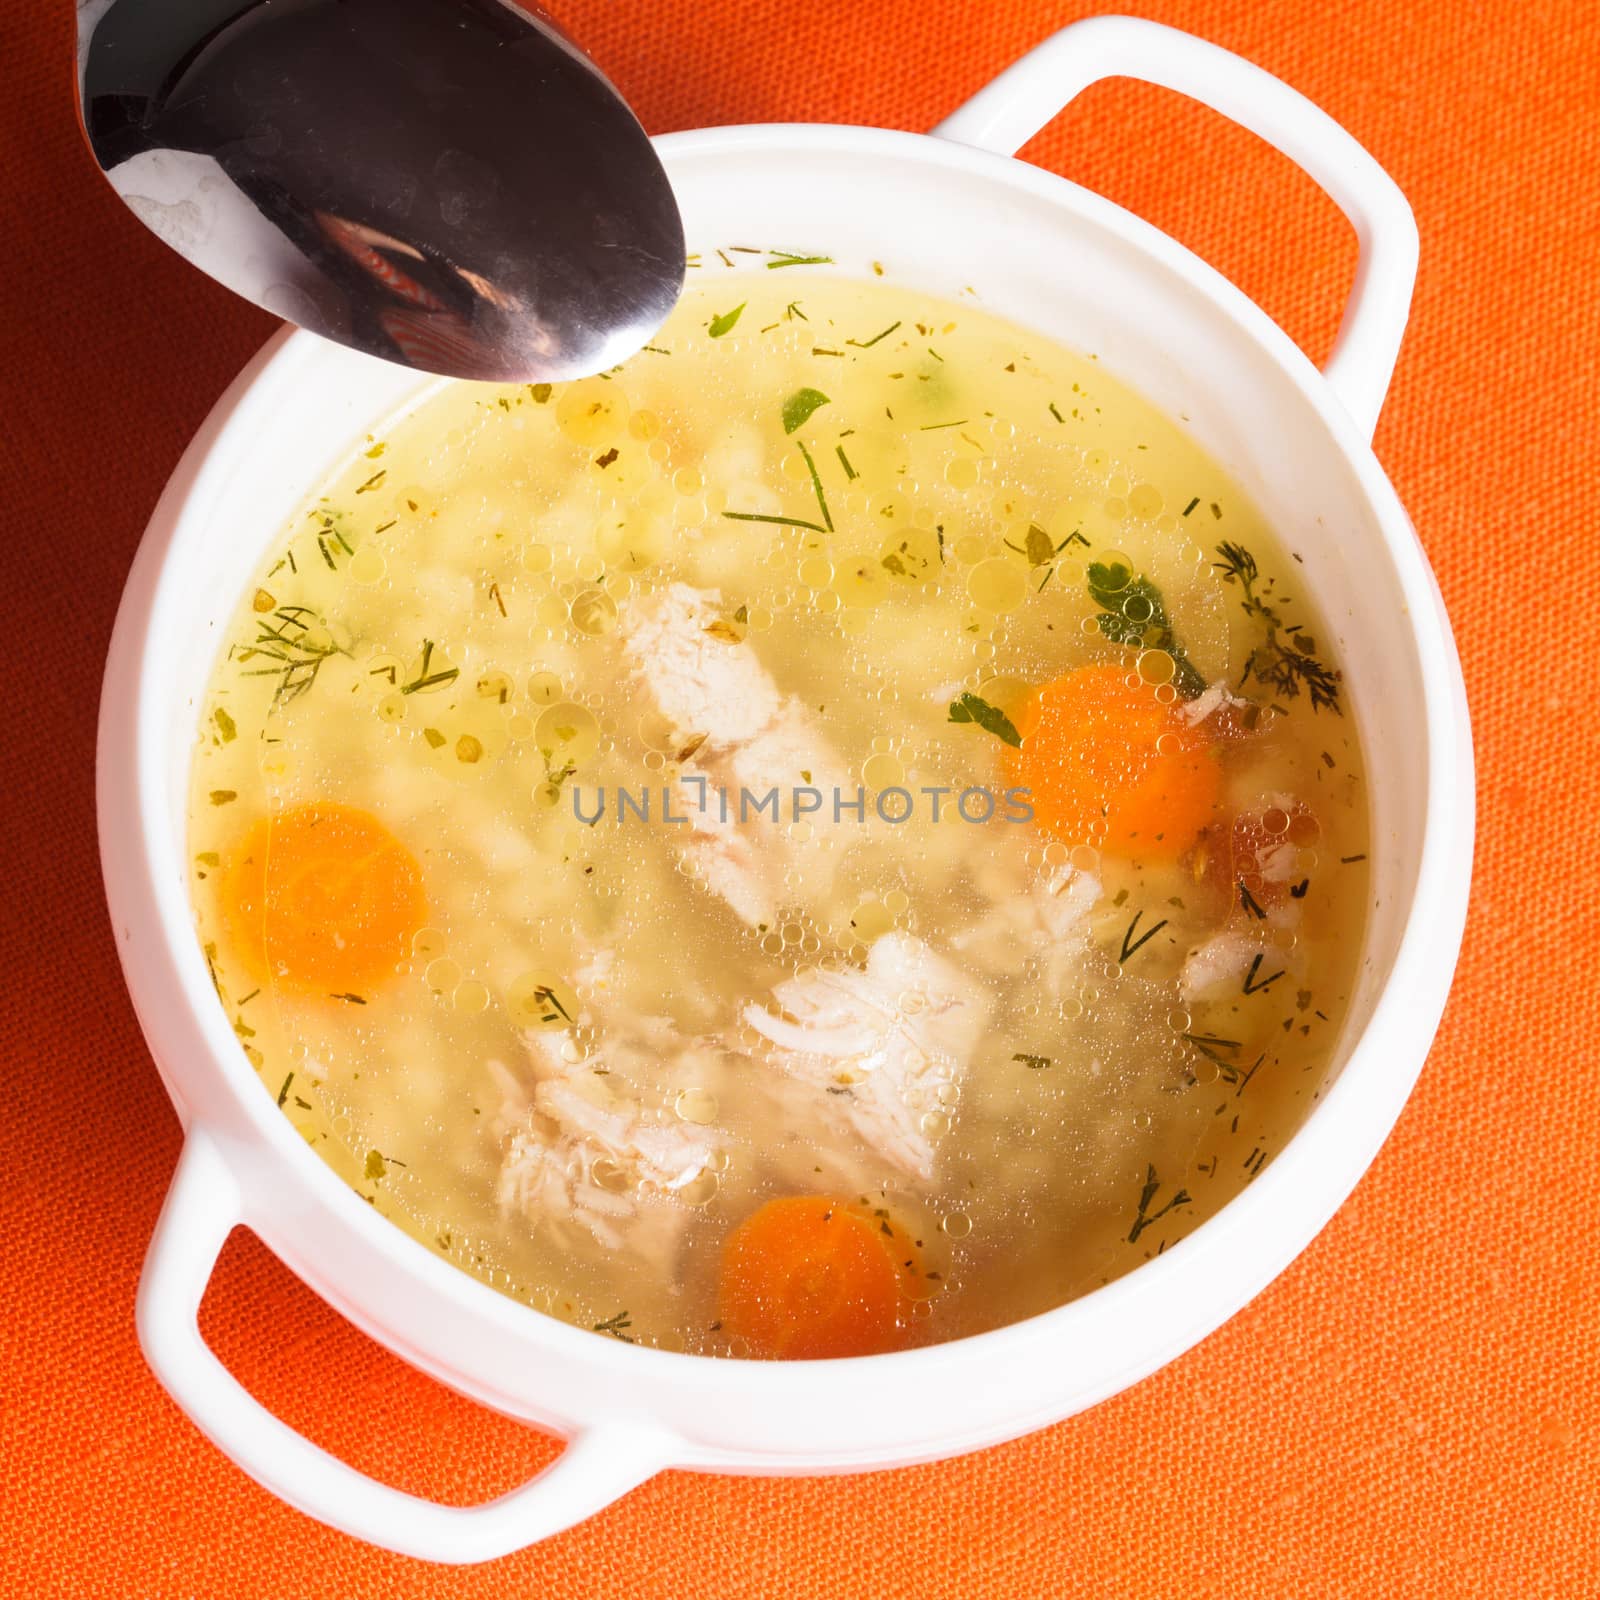 A chicken broth in white ware on the orange tablecloth